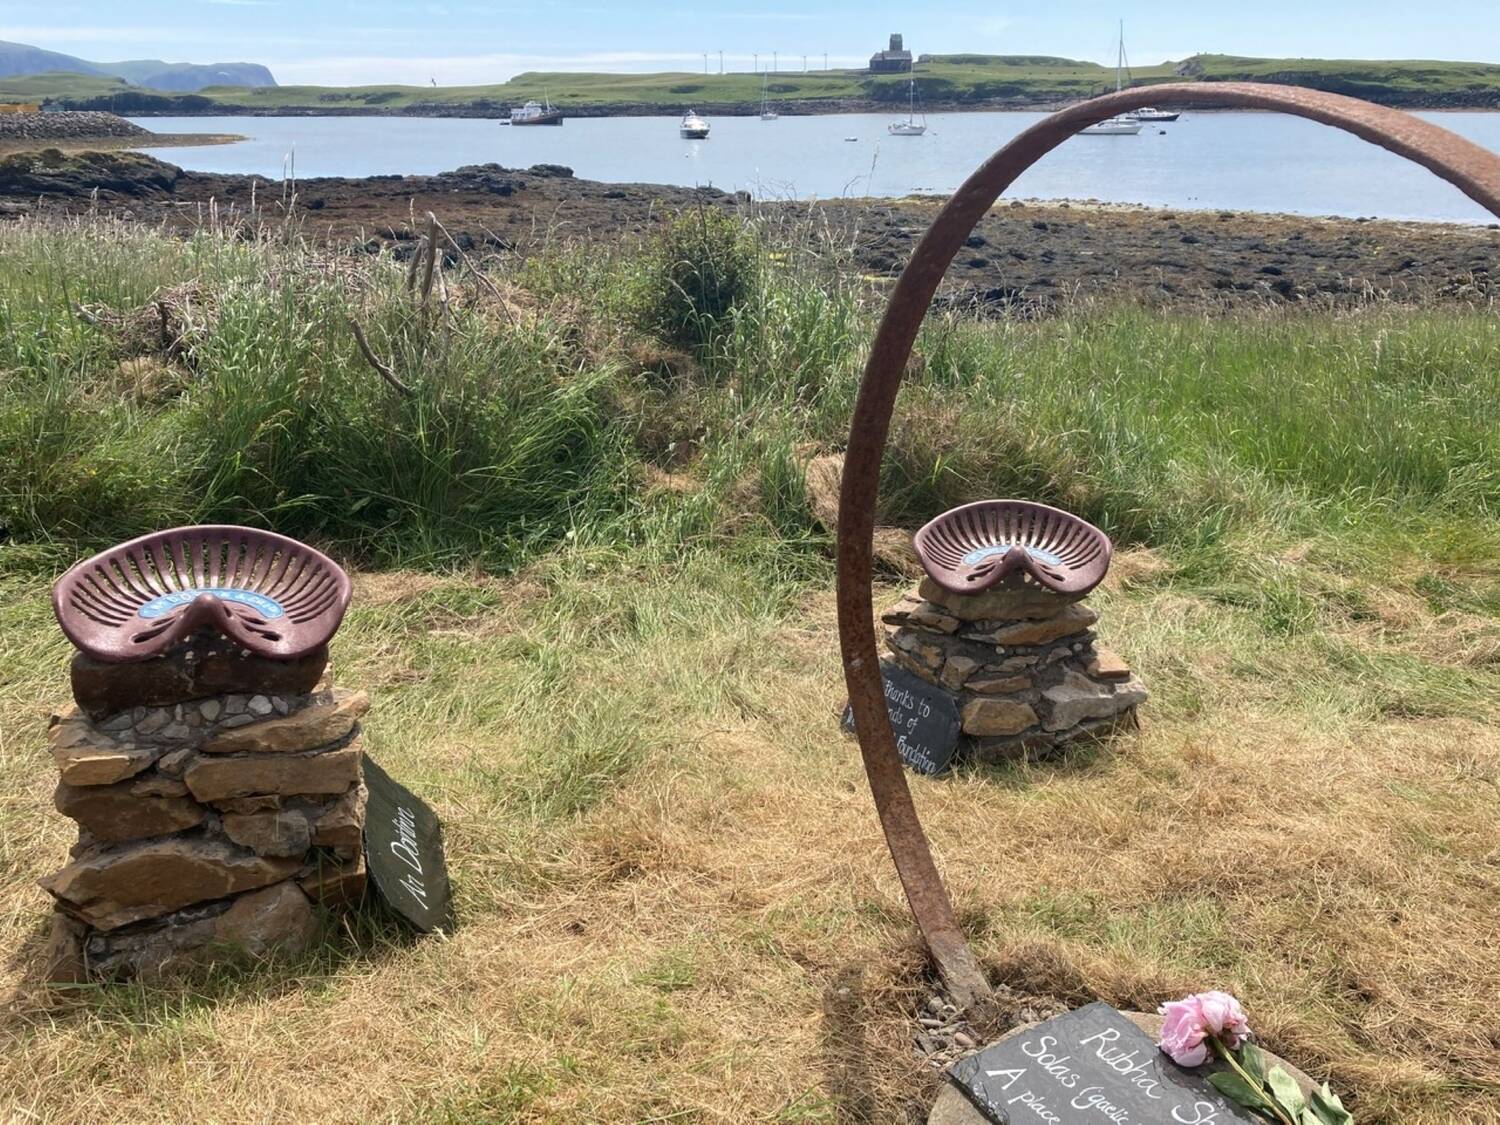 Stone cairns with old tractor seats attached to the top stand beside each other. Slates lie against the cairns, with names painted on it. Across the bay, in the distance, can be seen St Edward's Church, pictured through a large iron cartwheel hoop.